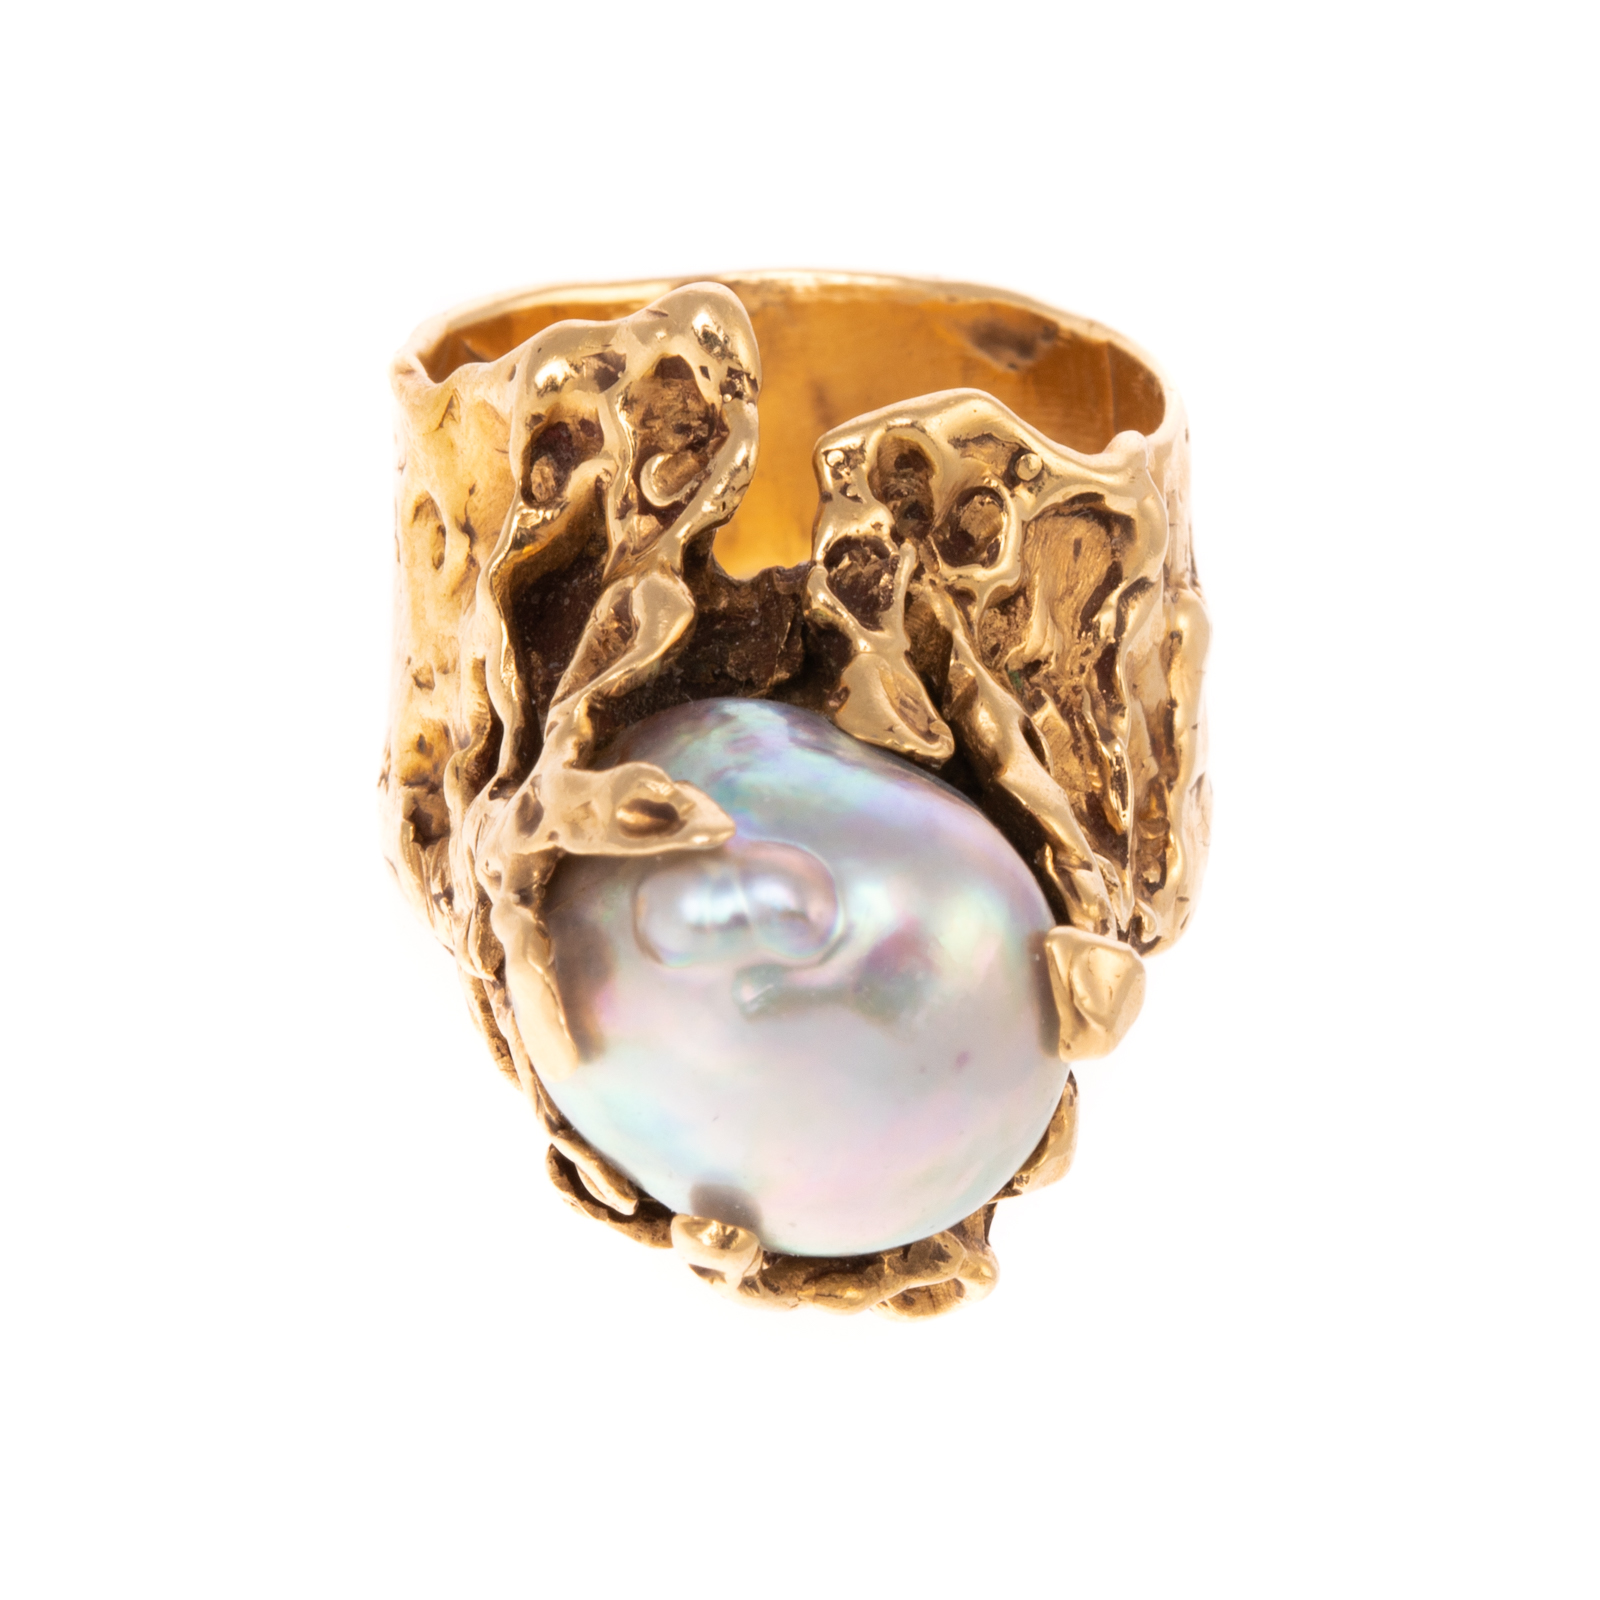 A FREEFORM SILVER PEARL RING IN 33854b